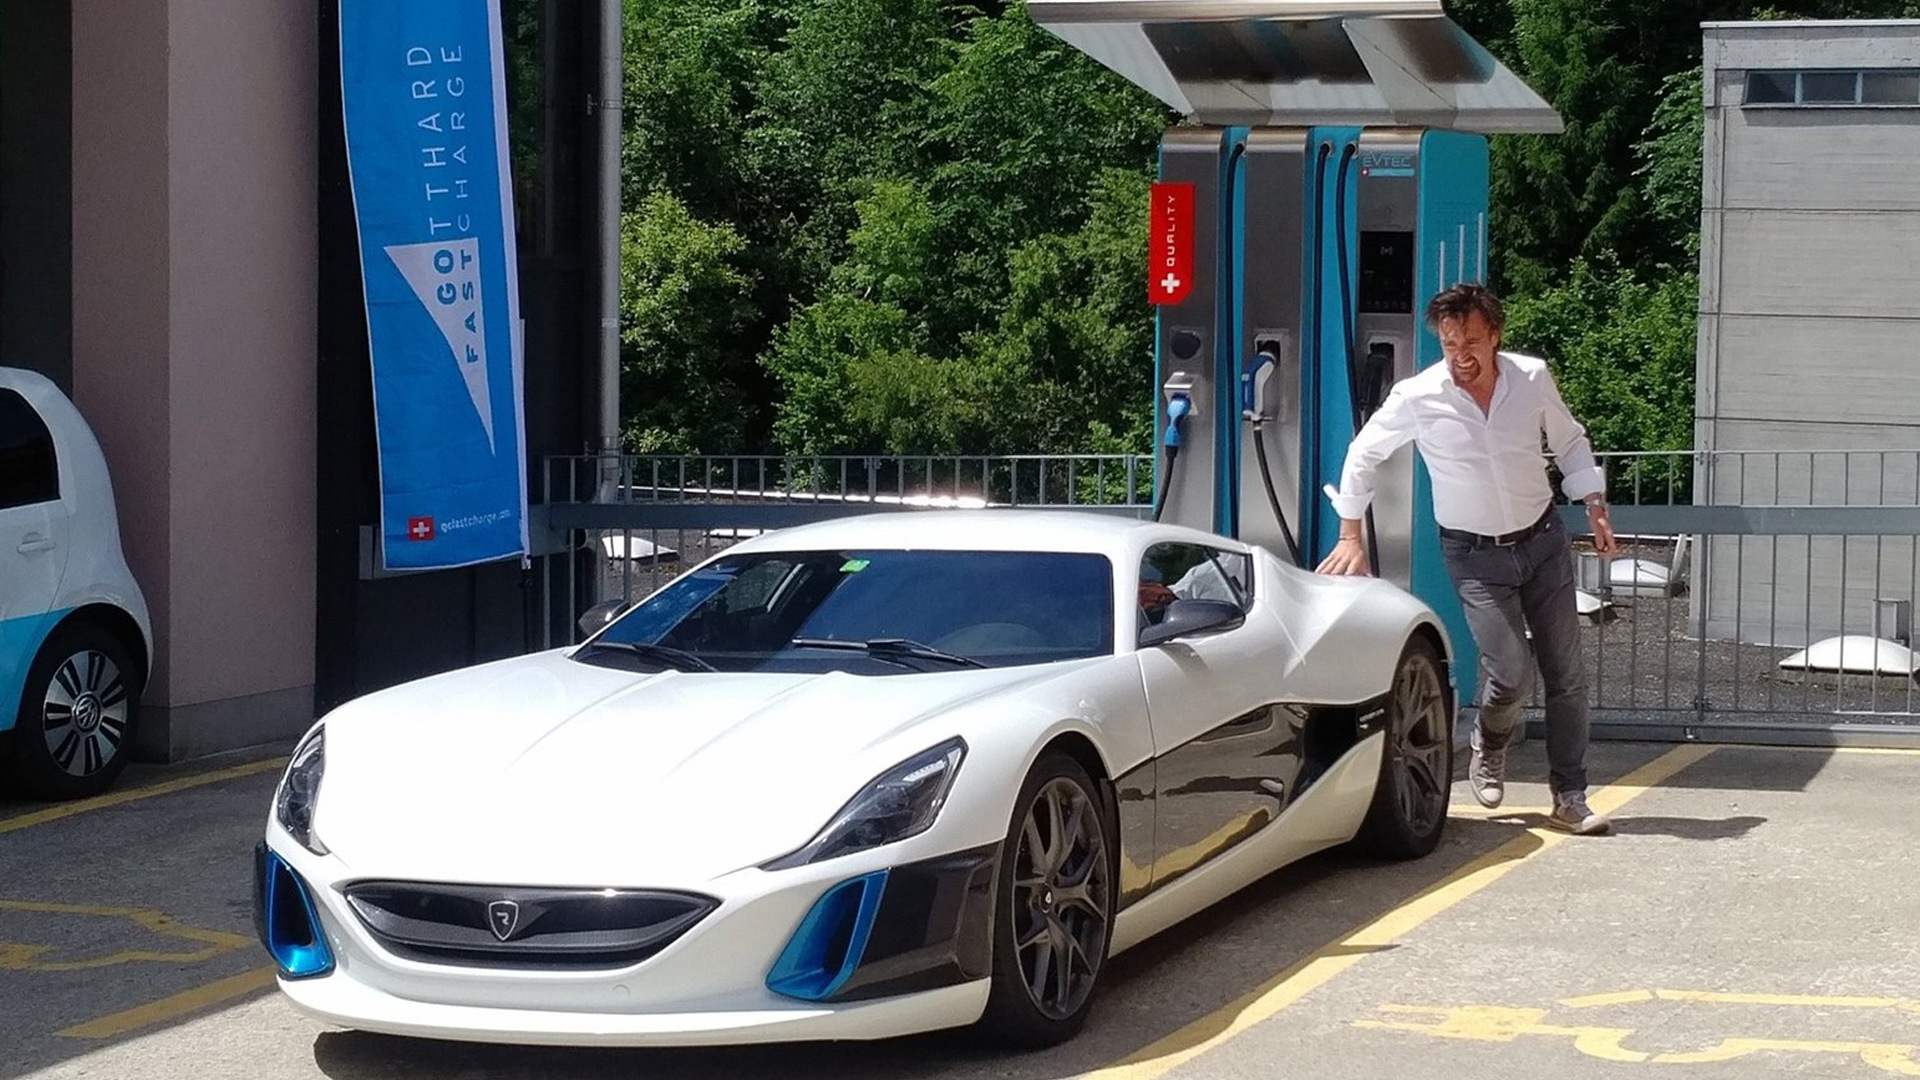 Richard Hammond with the Rimac Concept_One prior to his crash on June 10, 2017